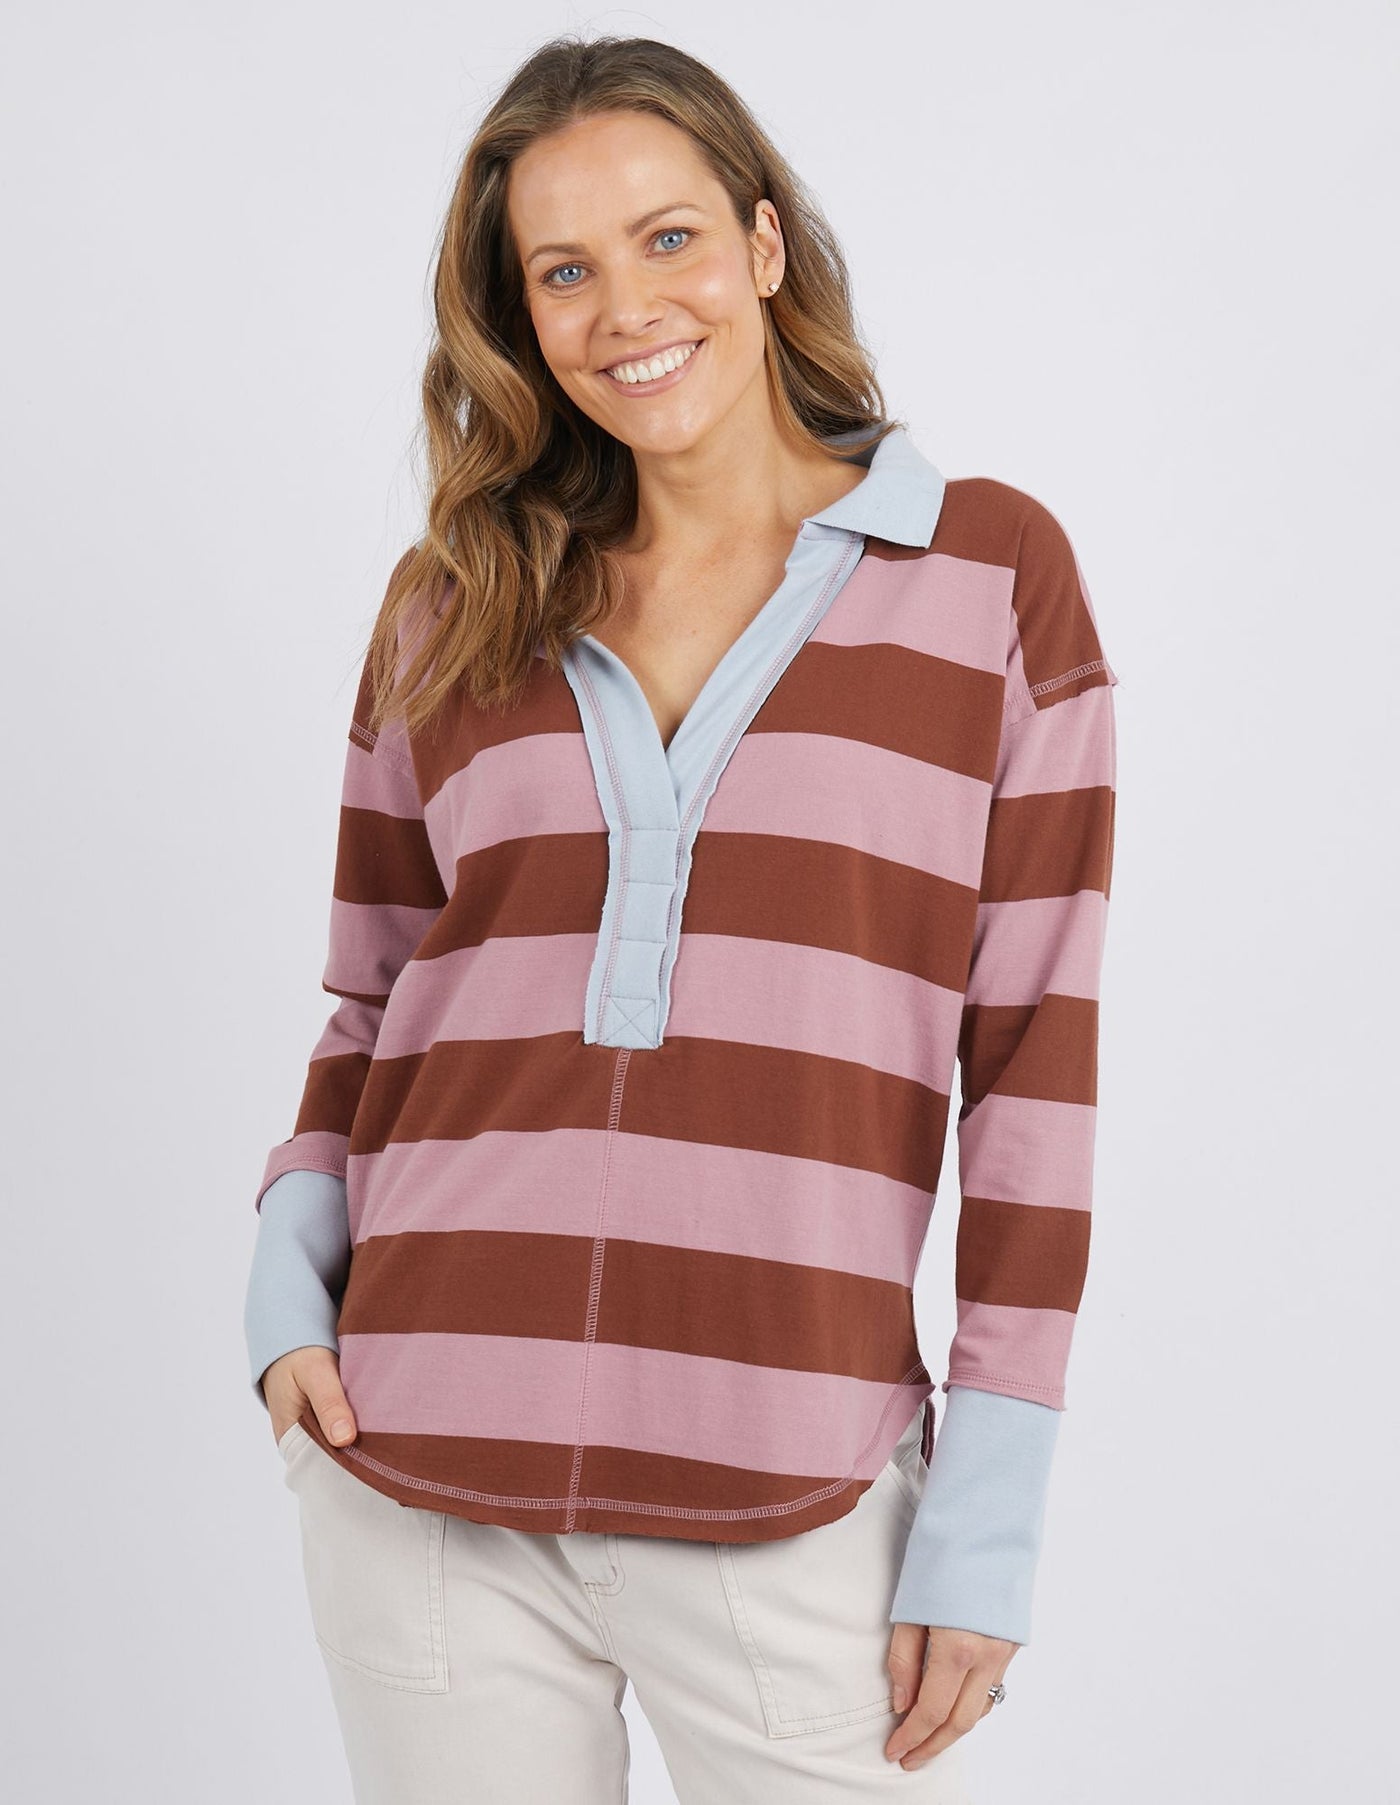 Everly Collar Detail Top - Choc Pink Stripe-Lima & Co-Lima & Co